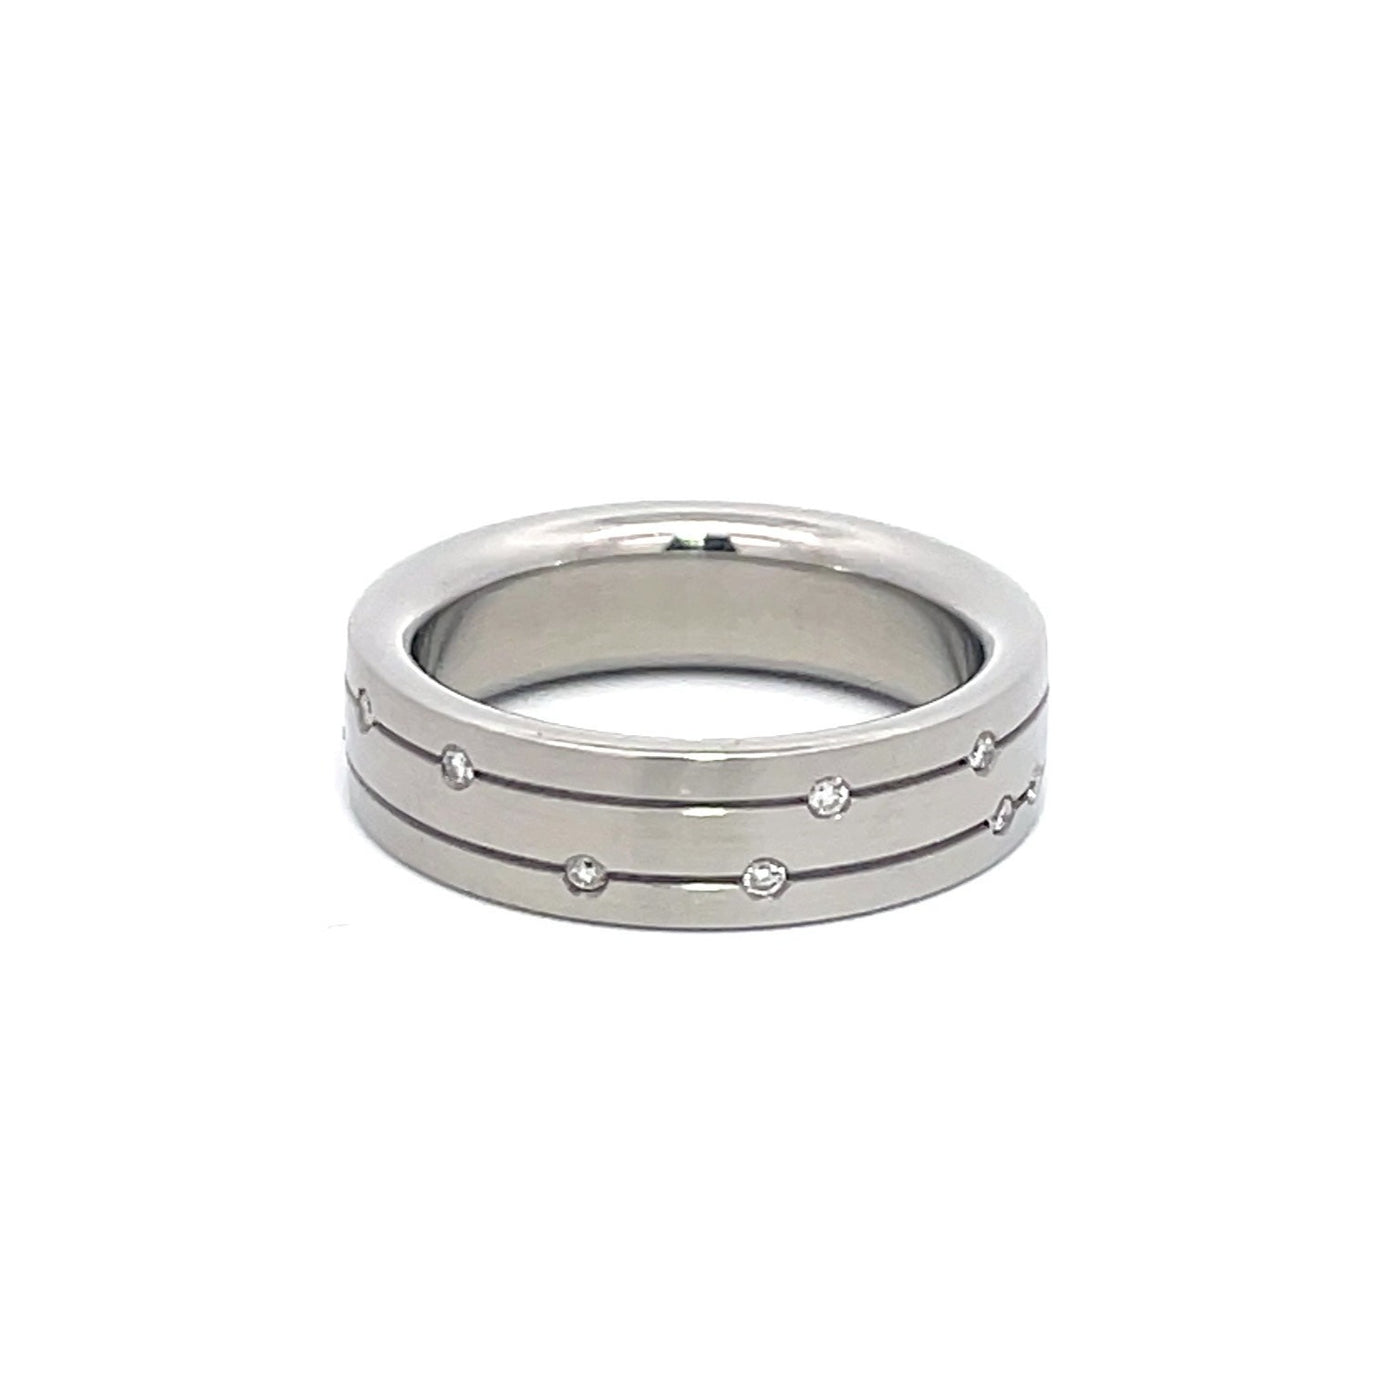 6mm Stainless Steel Incised Line Diamond Scatter Ring - Size N 1/2